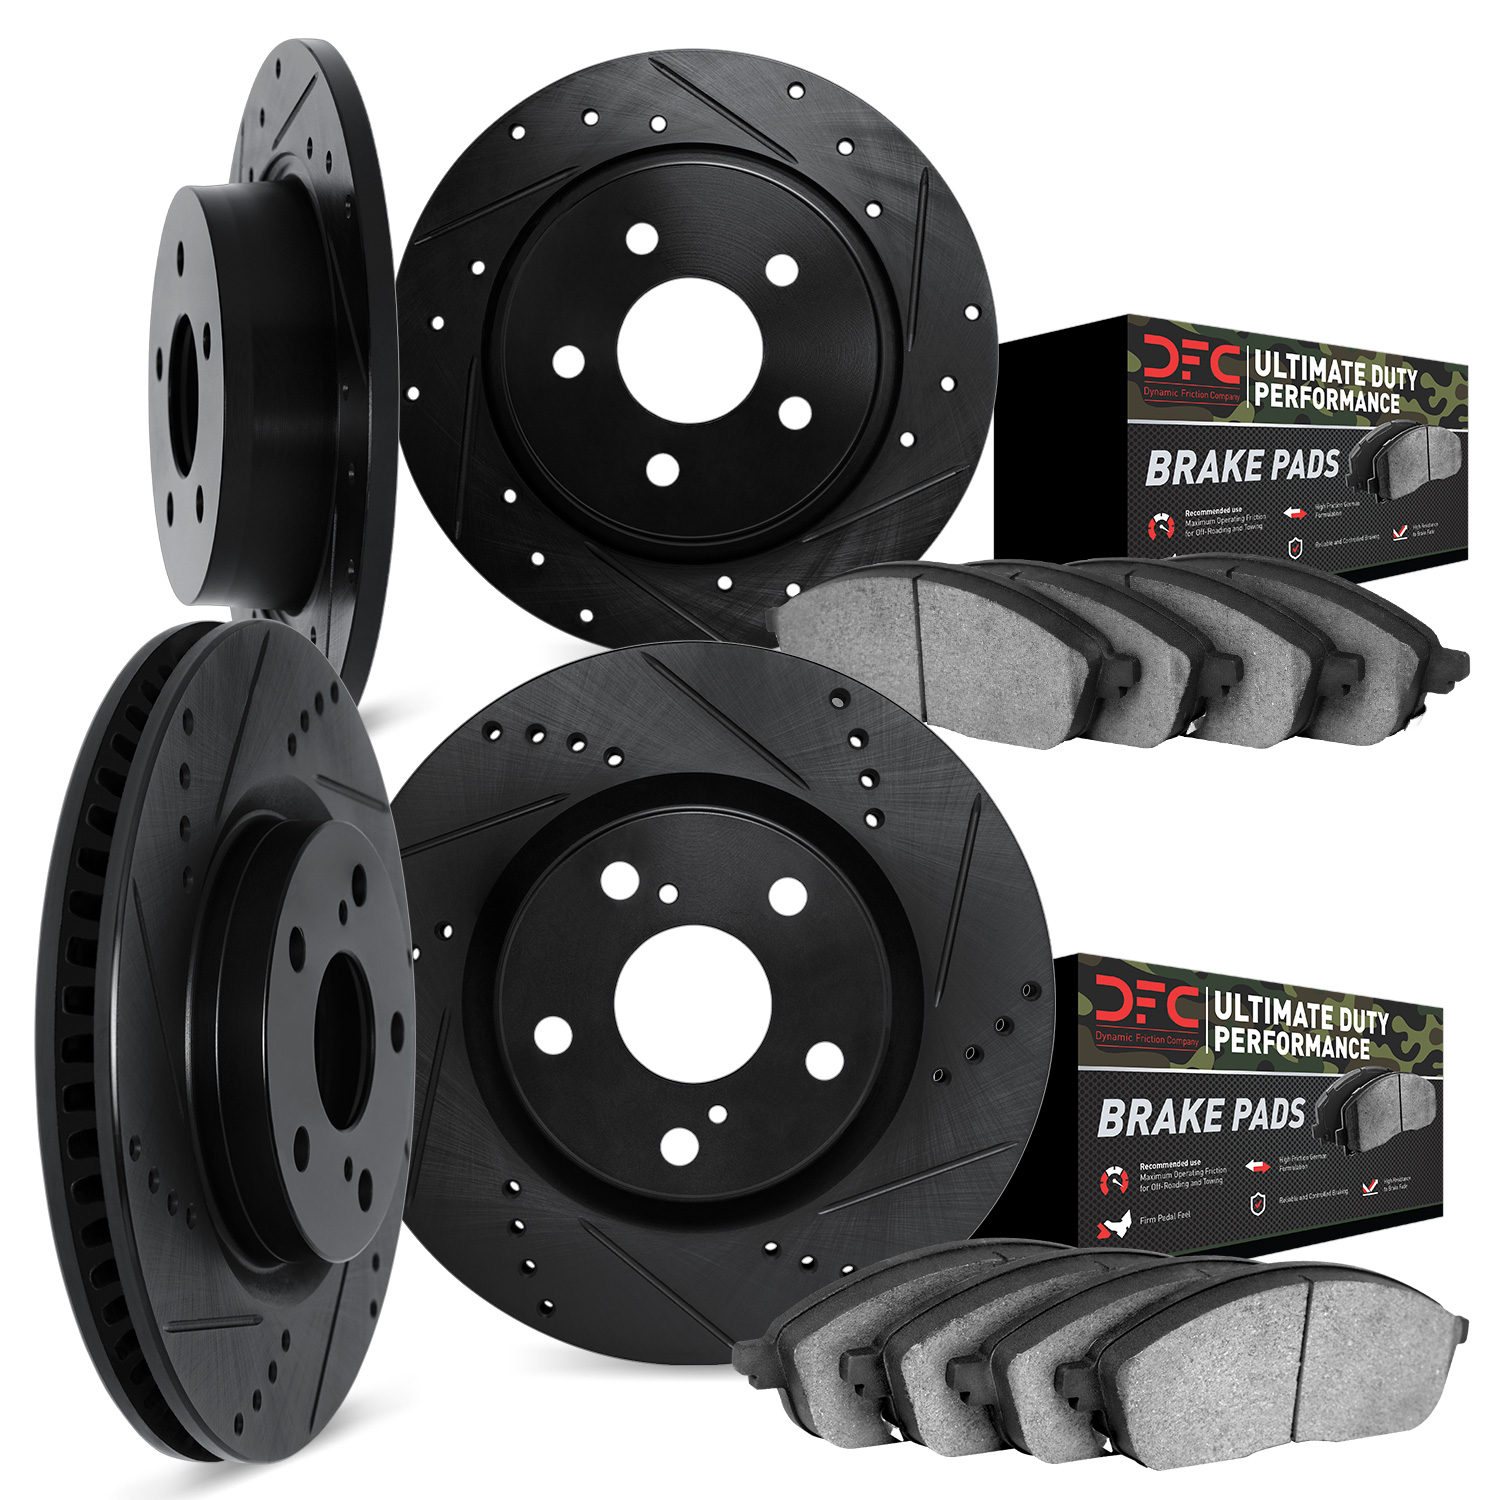 8404-42001 Drilled/Slotted Brake Rotors with Ultimate-Duty Brake Pads Kit [Black], 2005-2010 Mopar, Position: Front and Rear